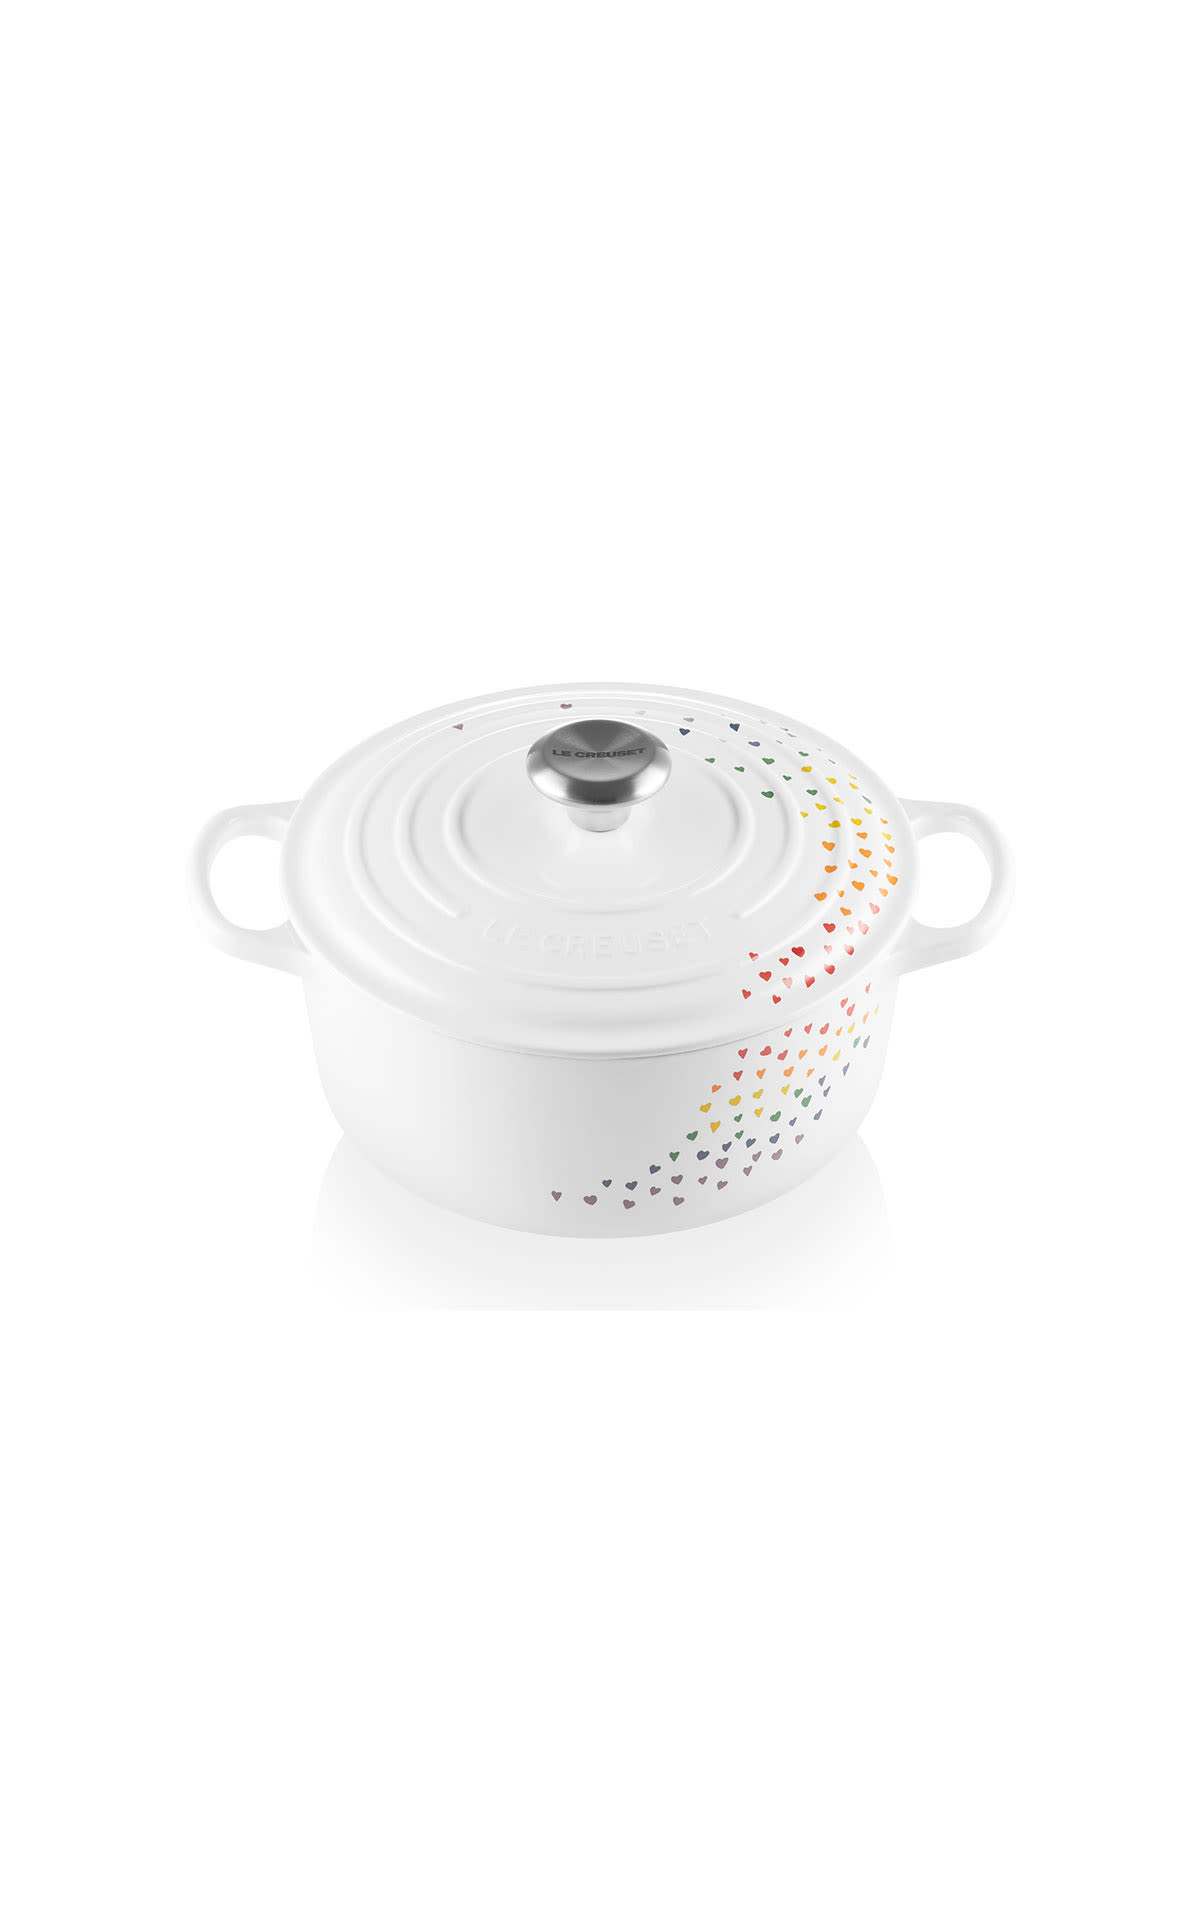 Le Creuset Loving casserole white round from Bicester Village